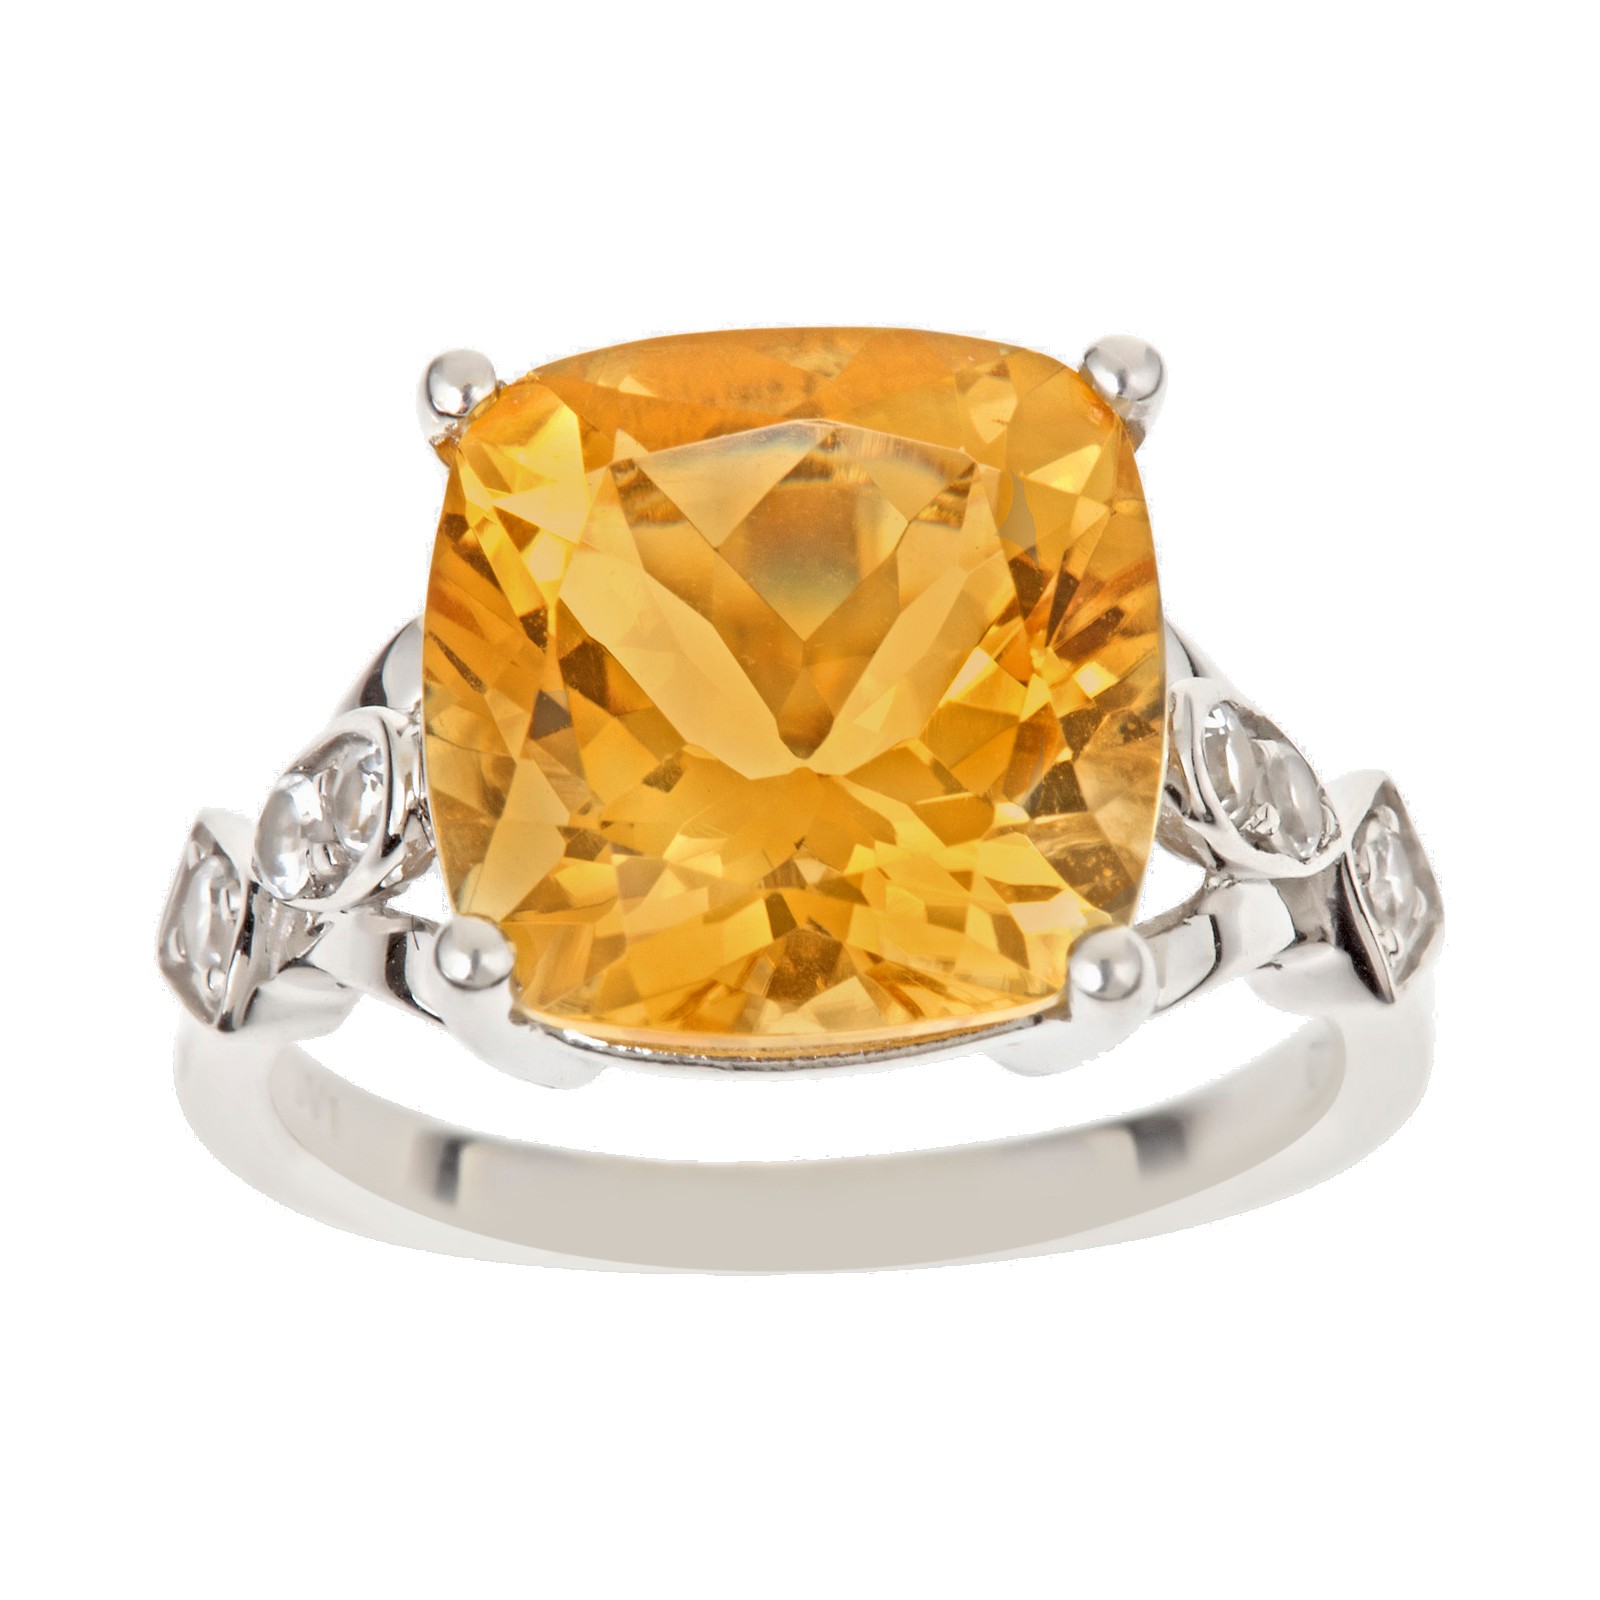 Ladies Sterling Silver Citrine and .10cttw Diamond Ring